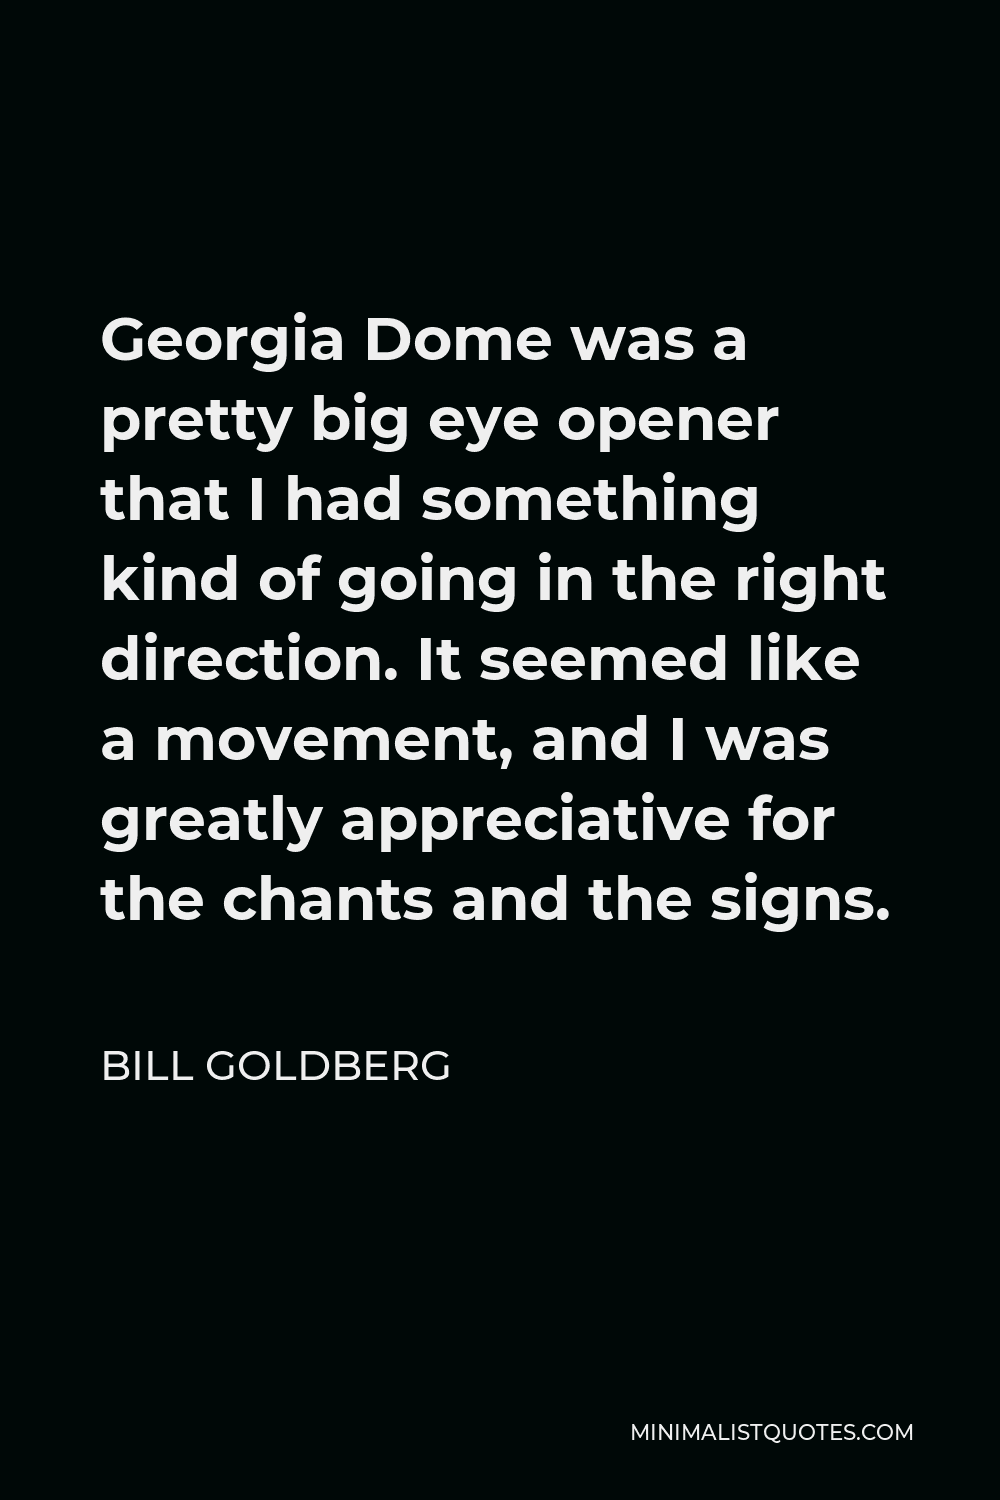 Bill Goldberg Quote - Georgia Dome was a pretty big eye opener that I had something kind of going in the right direction. It seemed like a movement, and I was greatly appreciative for the chants and the signs.